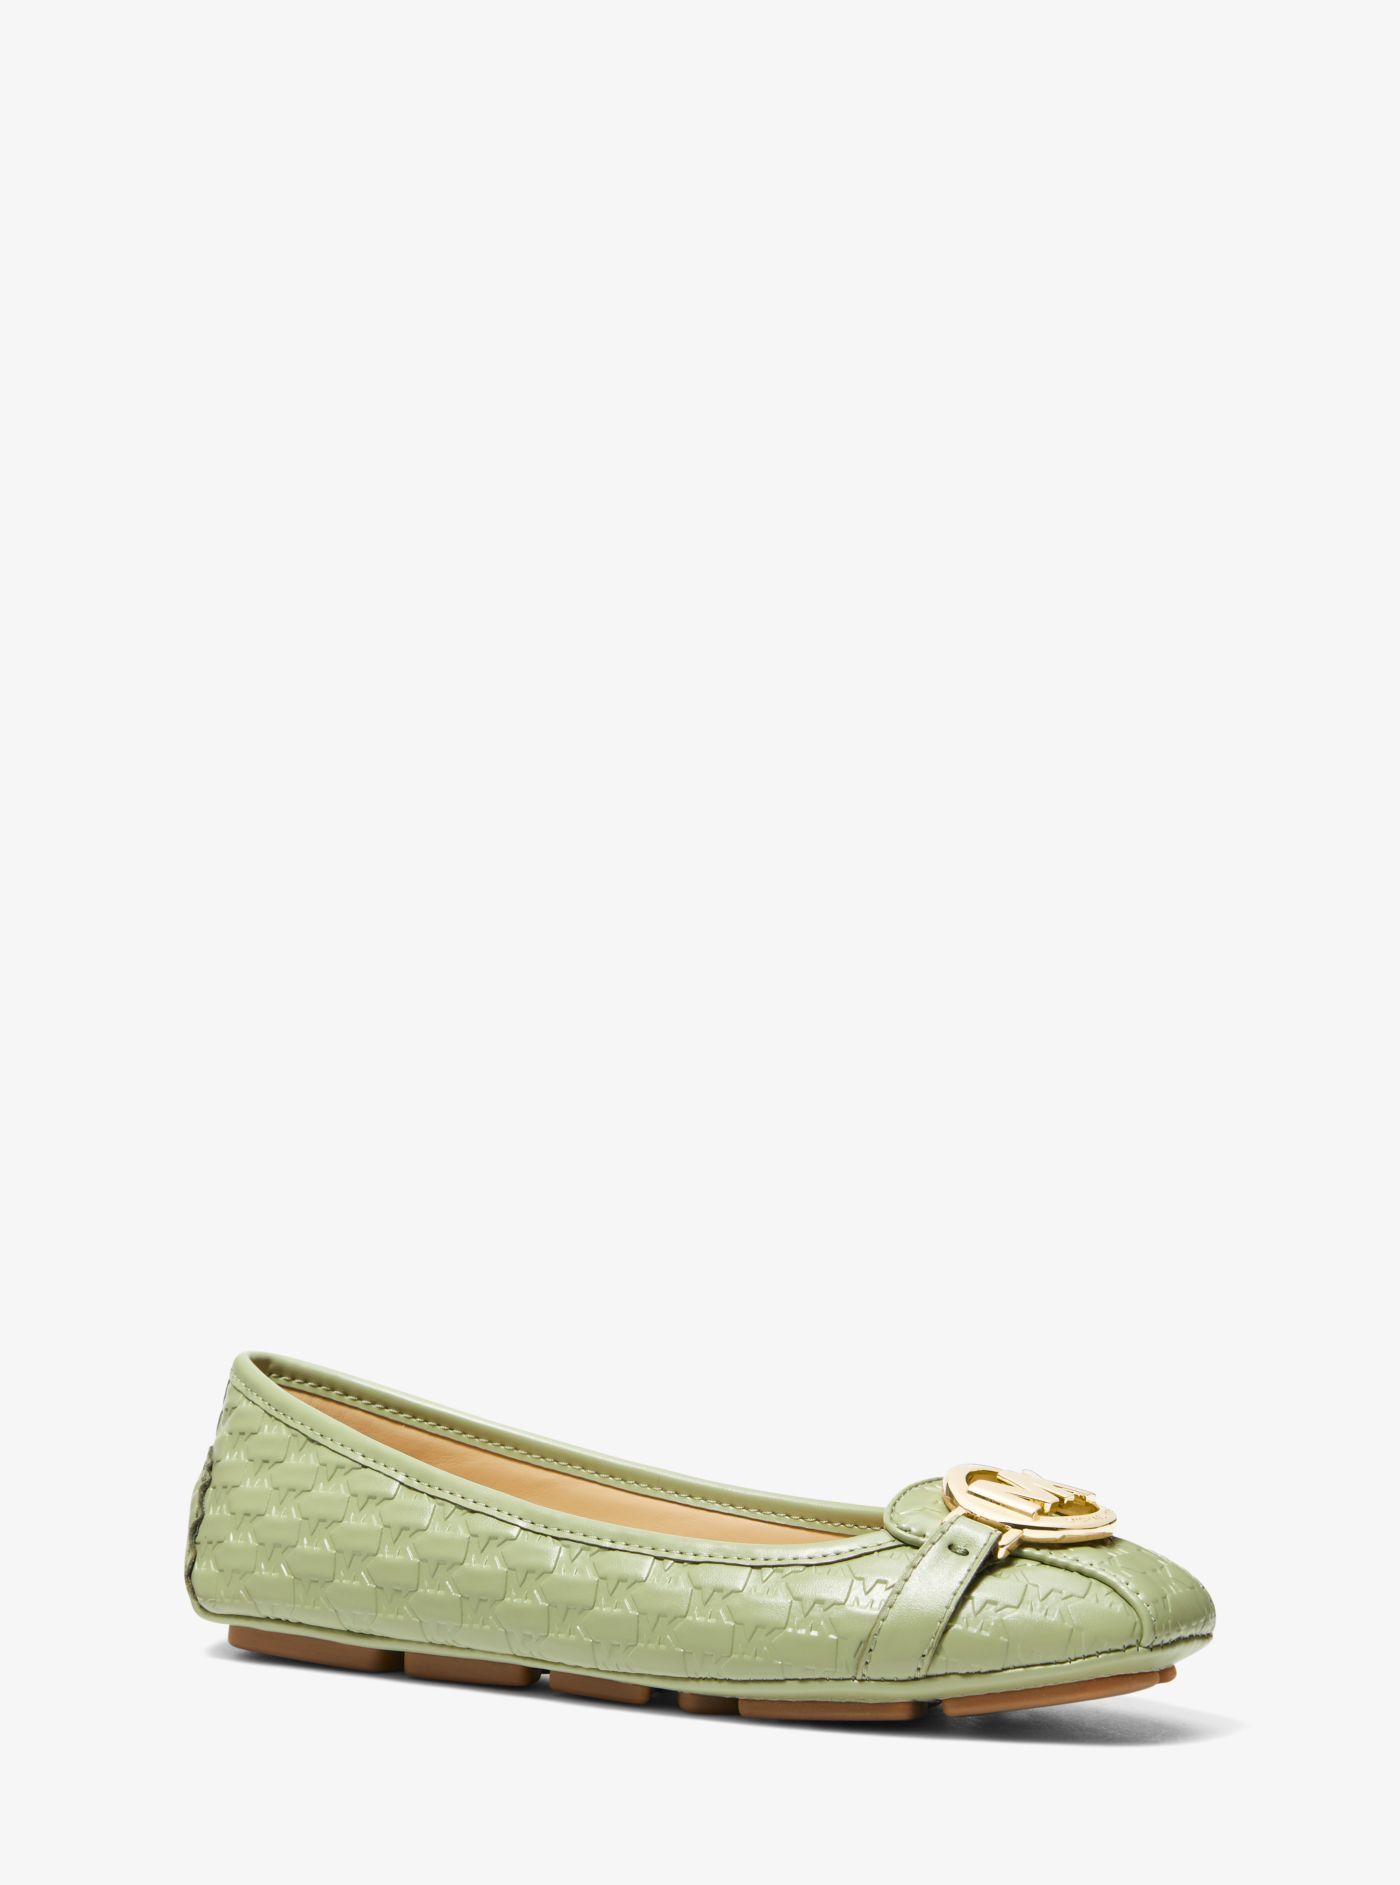 Michael Kors Fulton Logo Embossed Faux Leather Moccasin in Green | Lyst